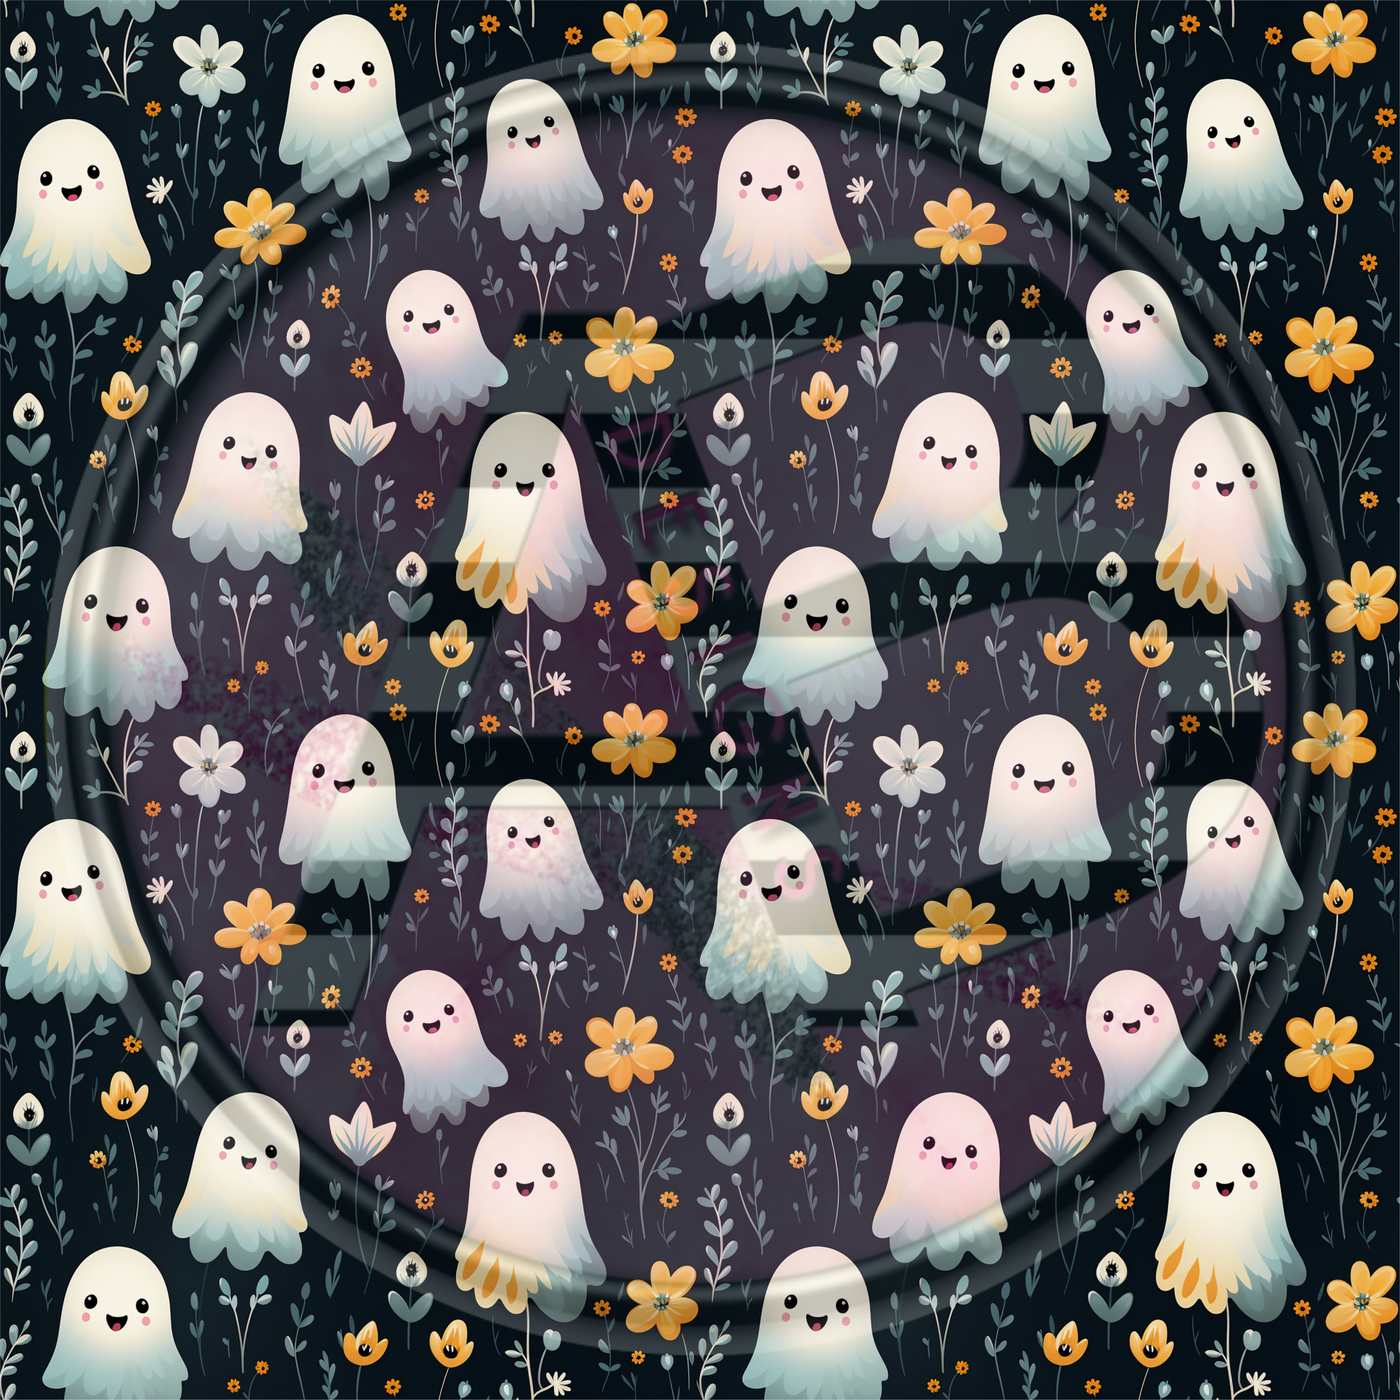 Adhesive Patterned Vinyl - Ghost 06 Smaller